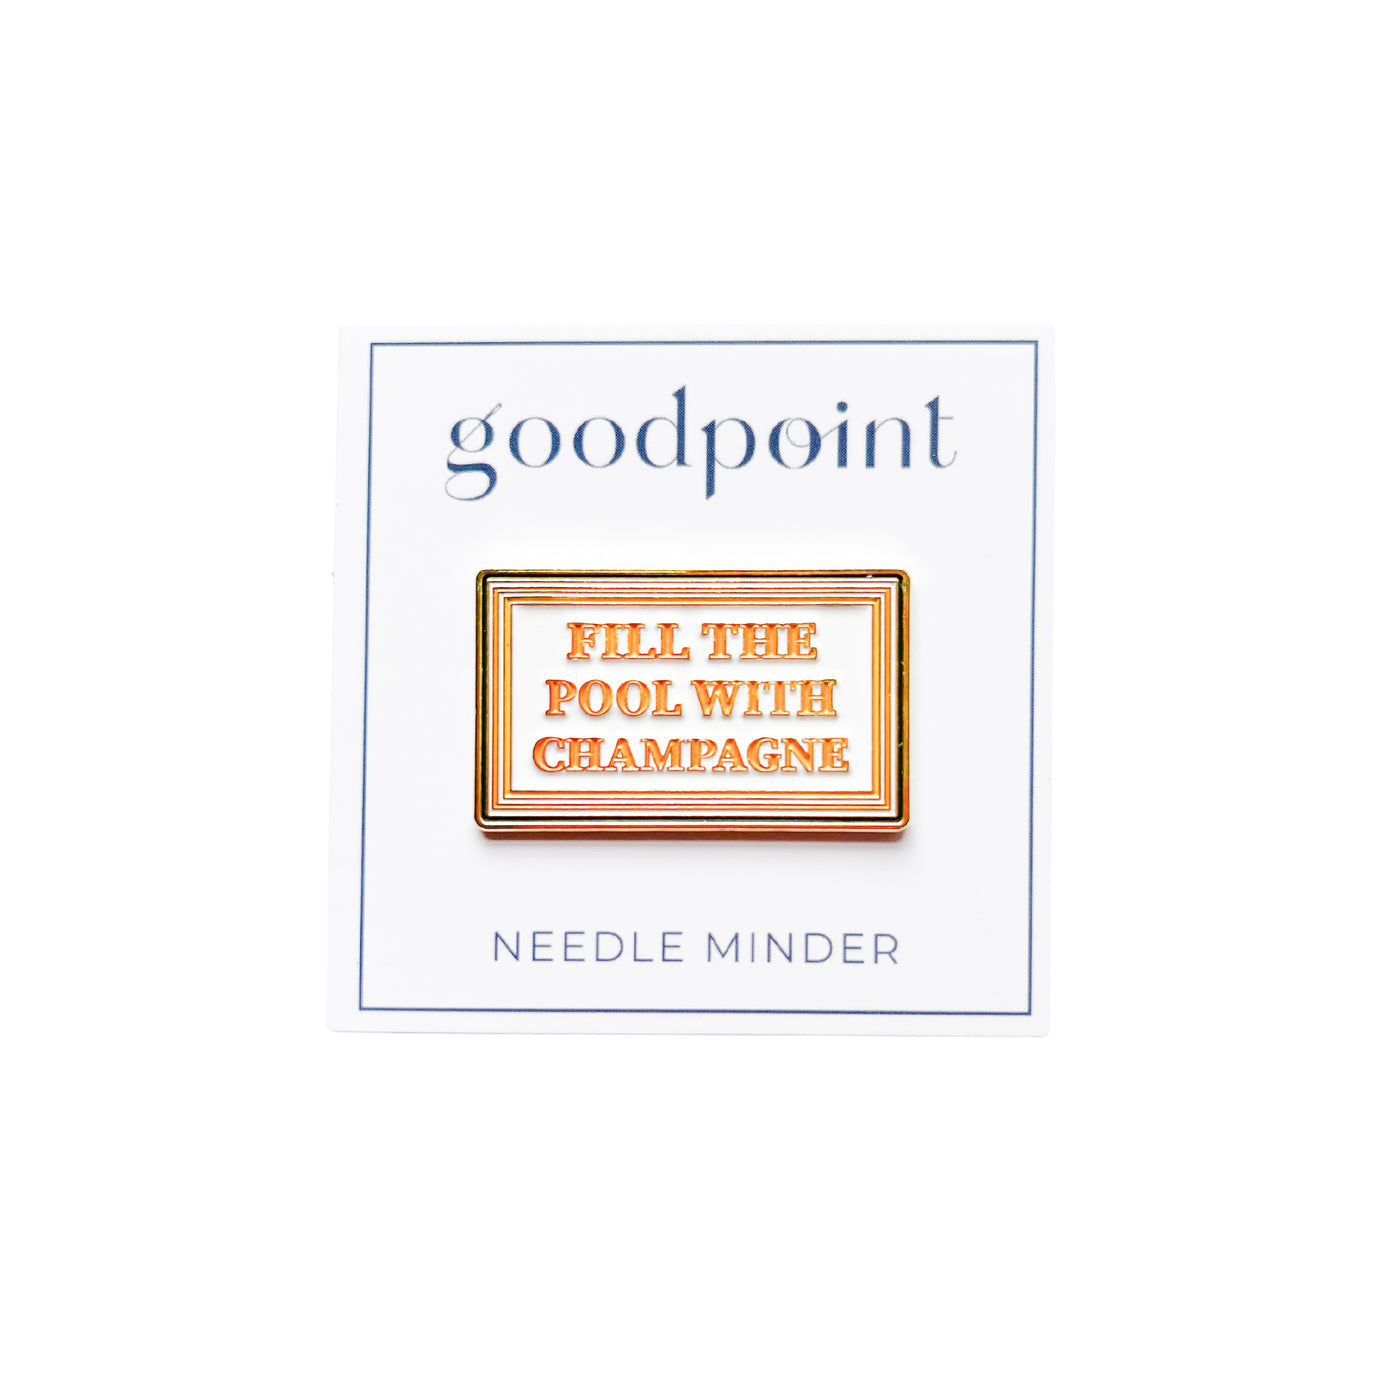 White card stock with the goodpoint logo holds an enamel needle minder with a green, orange and gold striped border and the words Fill the Pool with Champagne in orange at center